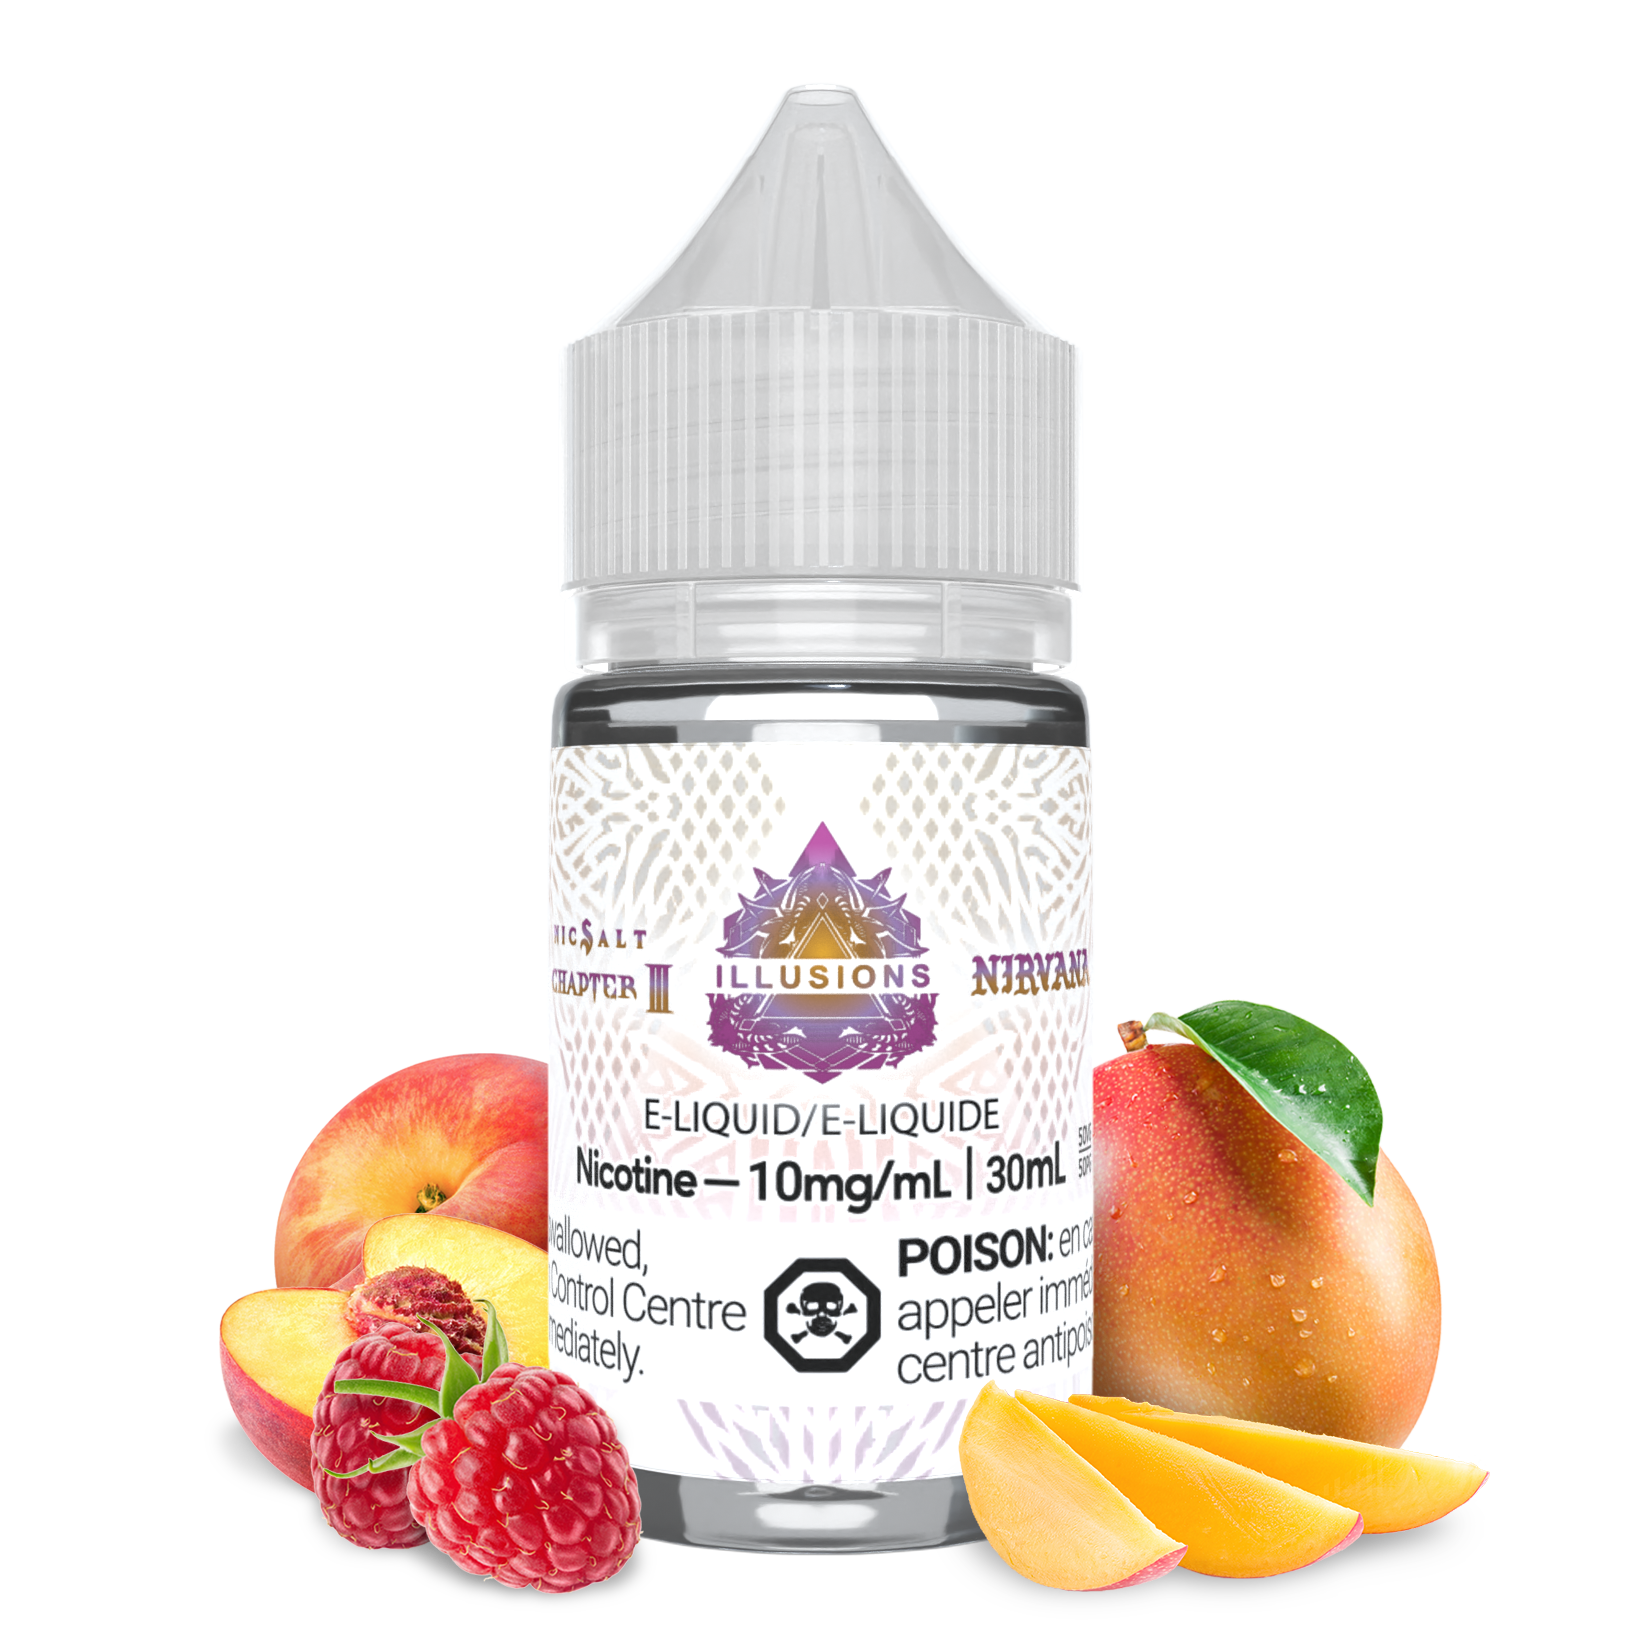 a 30 mL bottle of Nic Salt Vape E-liquid, NIrvana from chapter 3 by Illusions Vapor, this vape juice is available both in freebase variant and Nic Salt